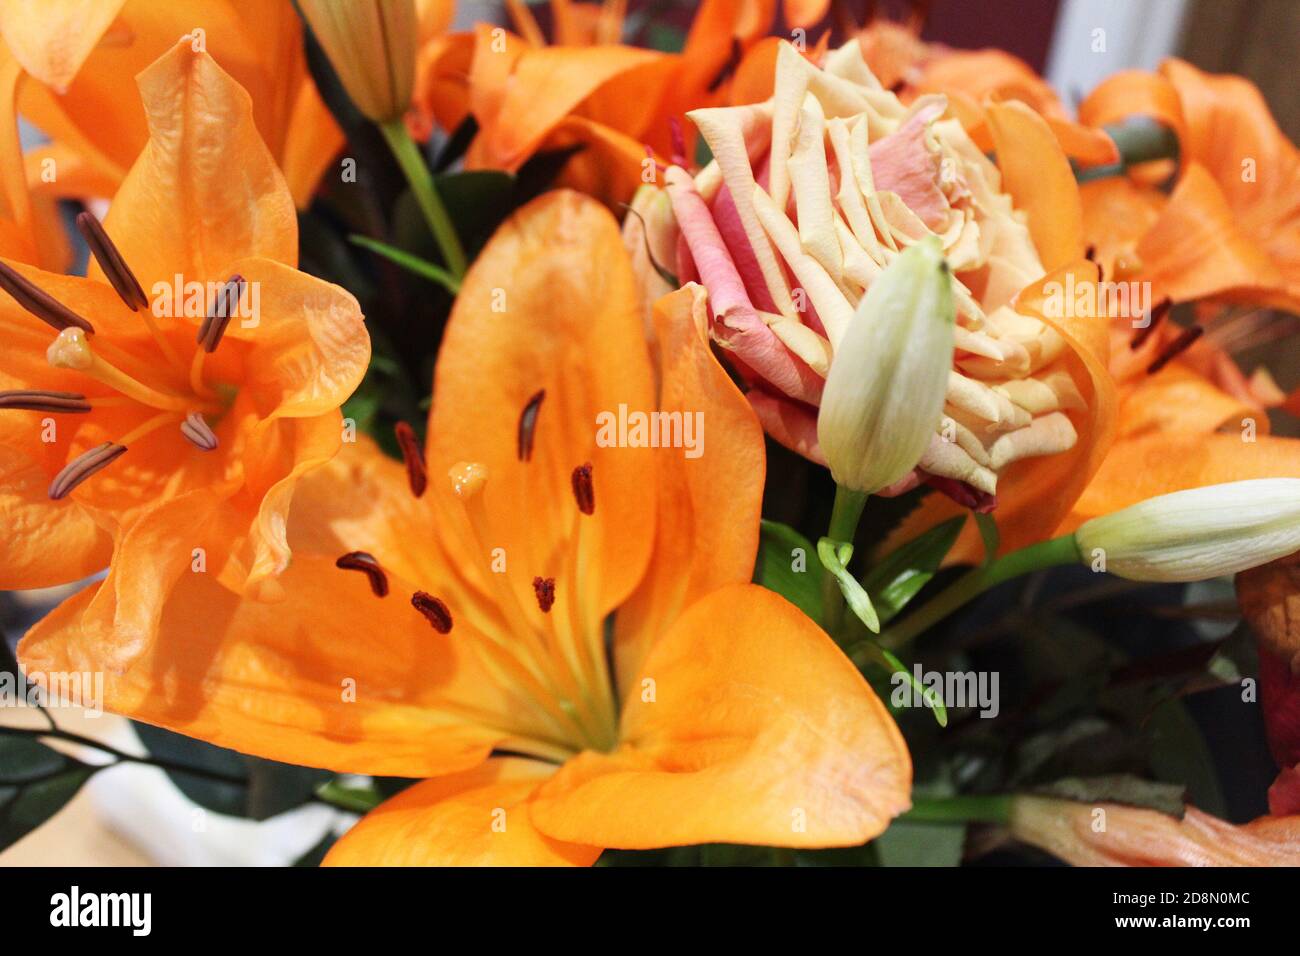 Close up bouquet/bunch of Orange County king lilies (Lilium) and orange roses (Rosa), orange flowers Stock Photo